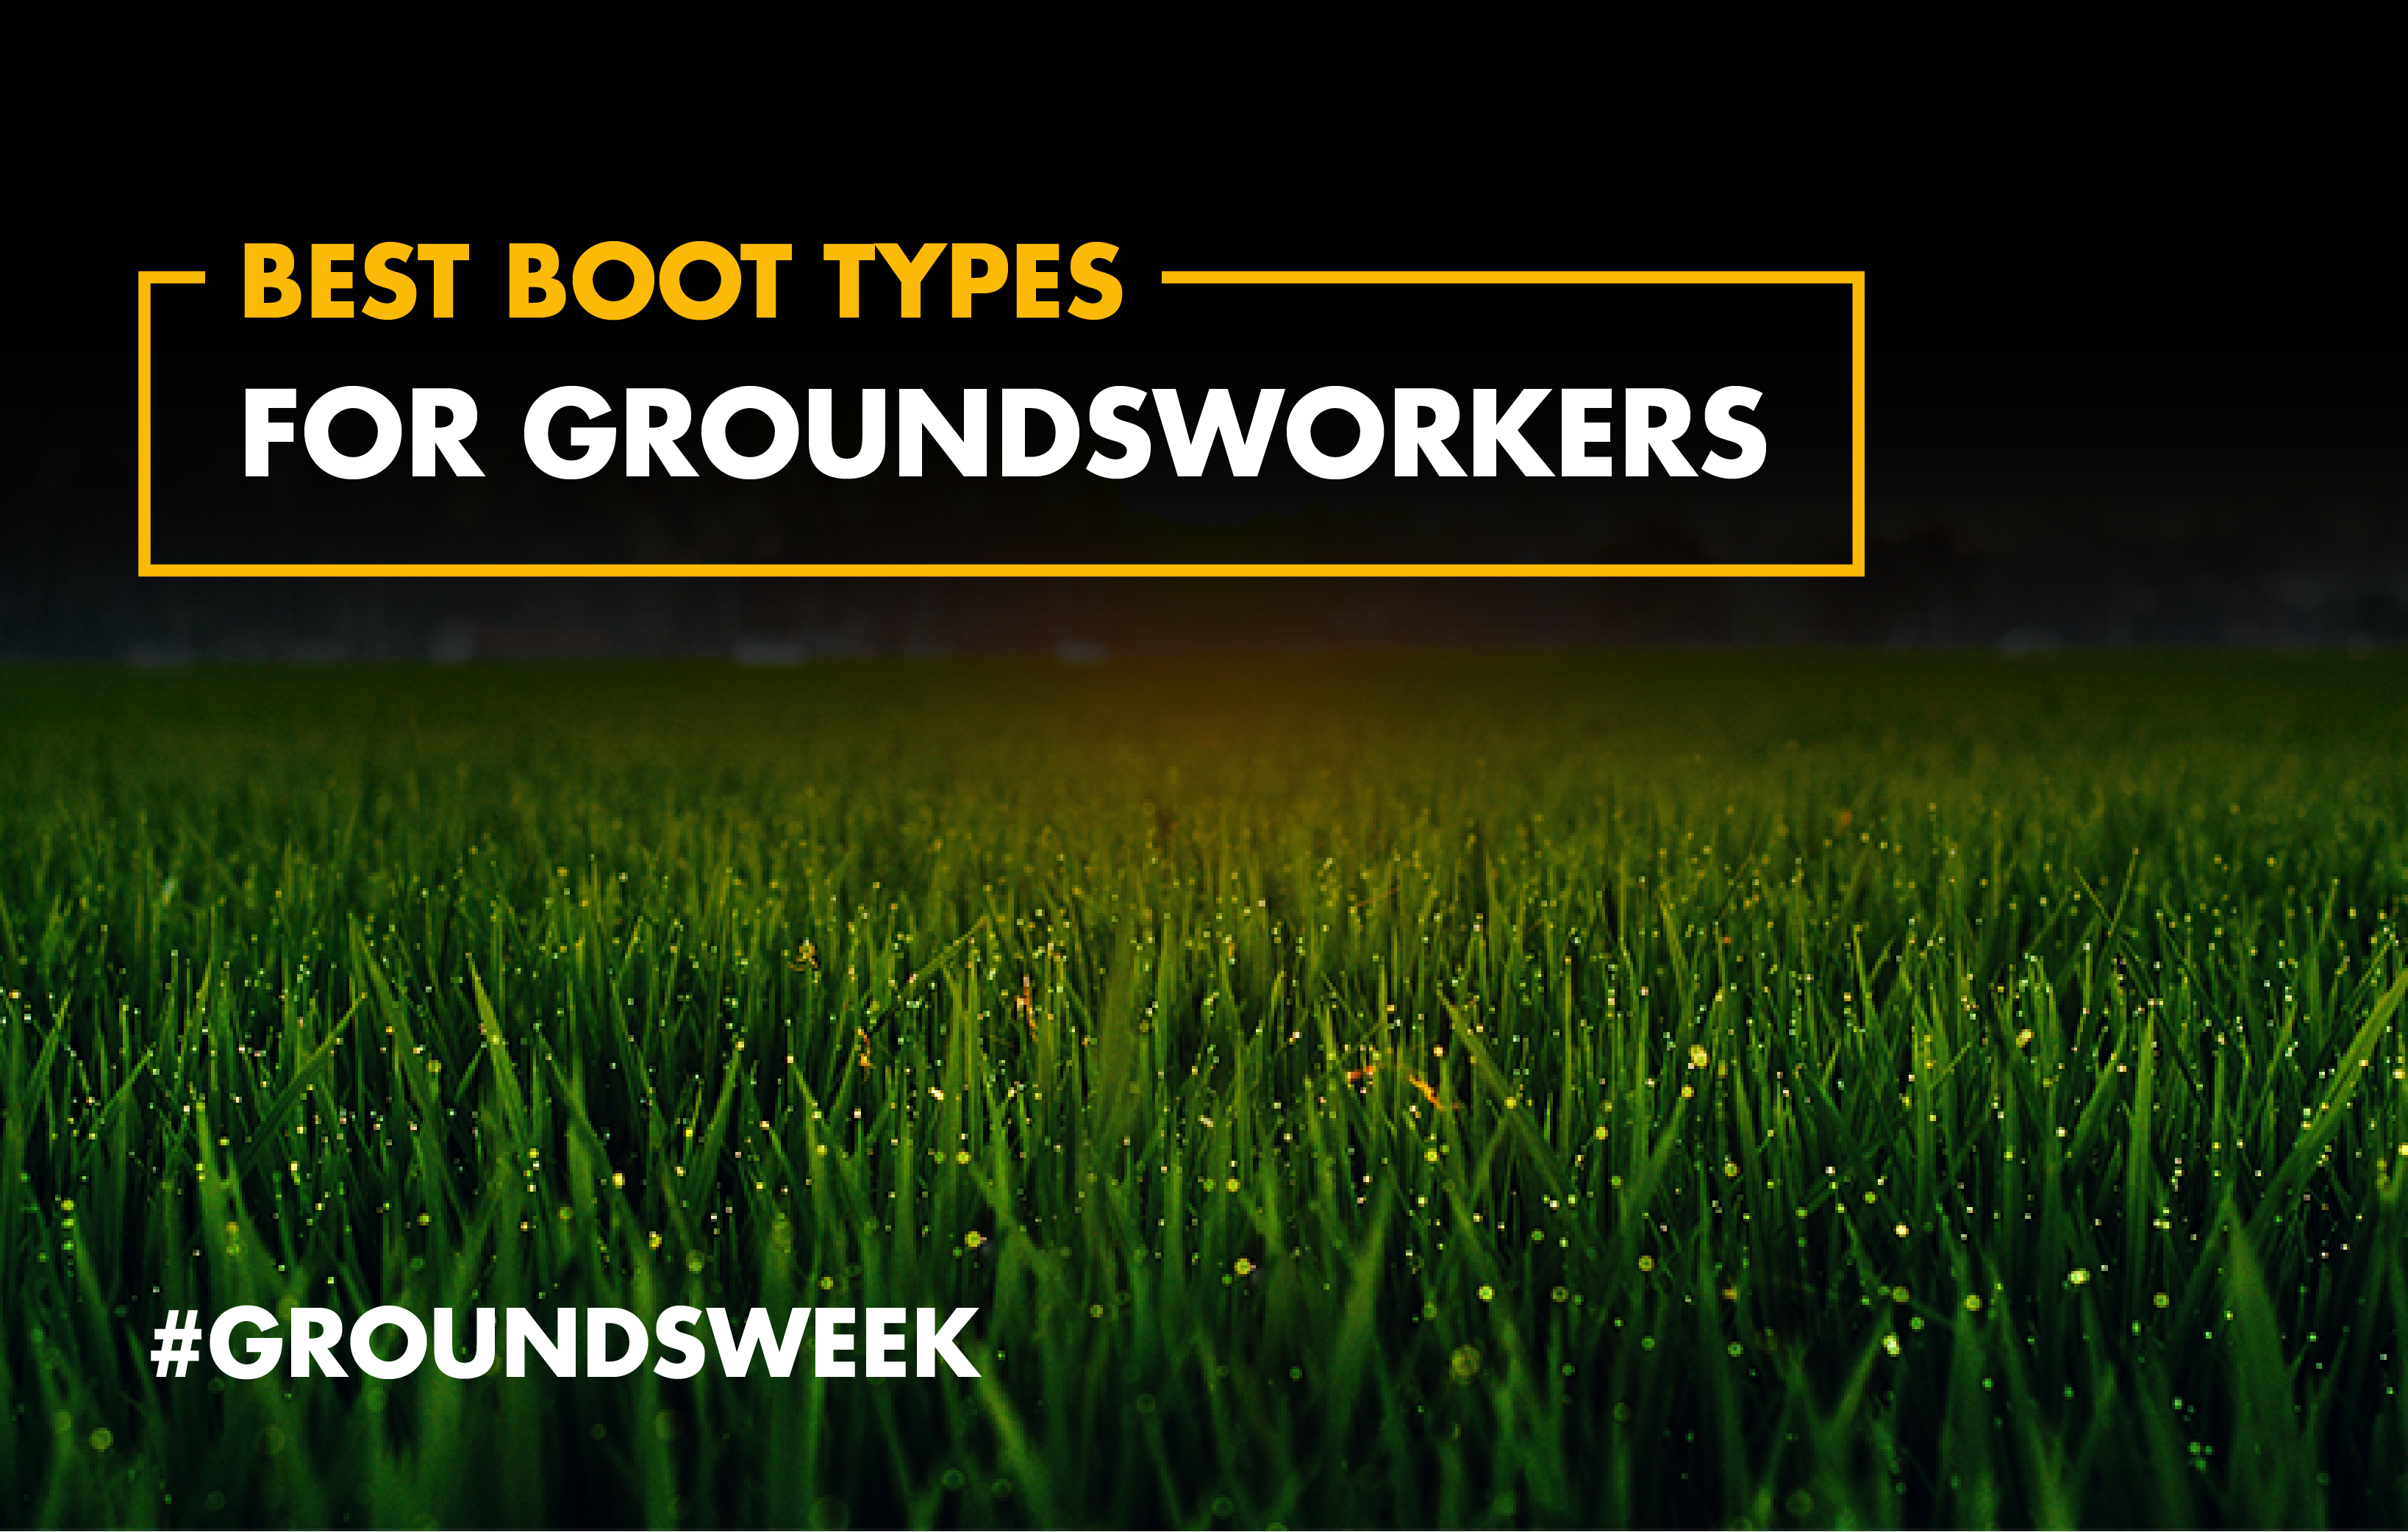 Best boot types for groundsworkers